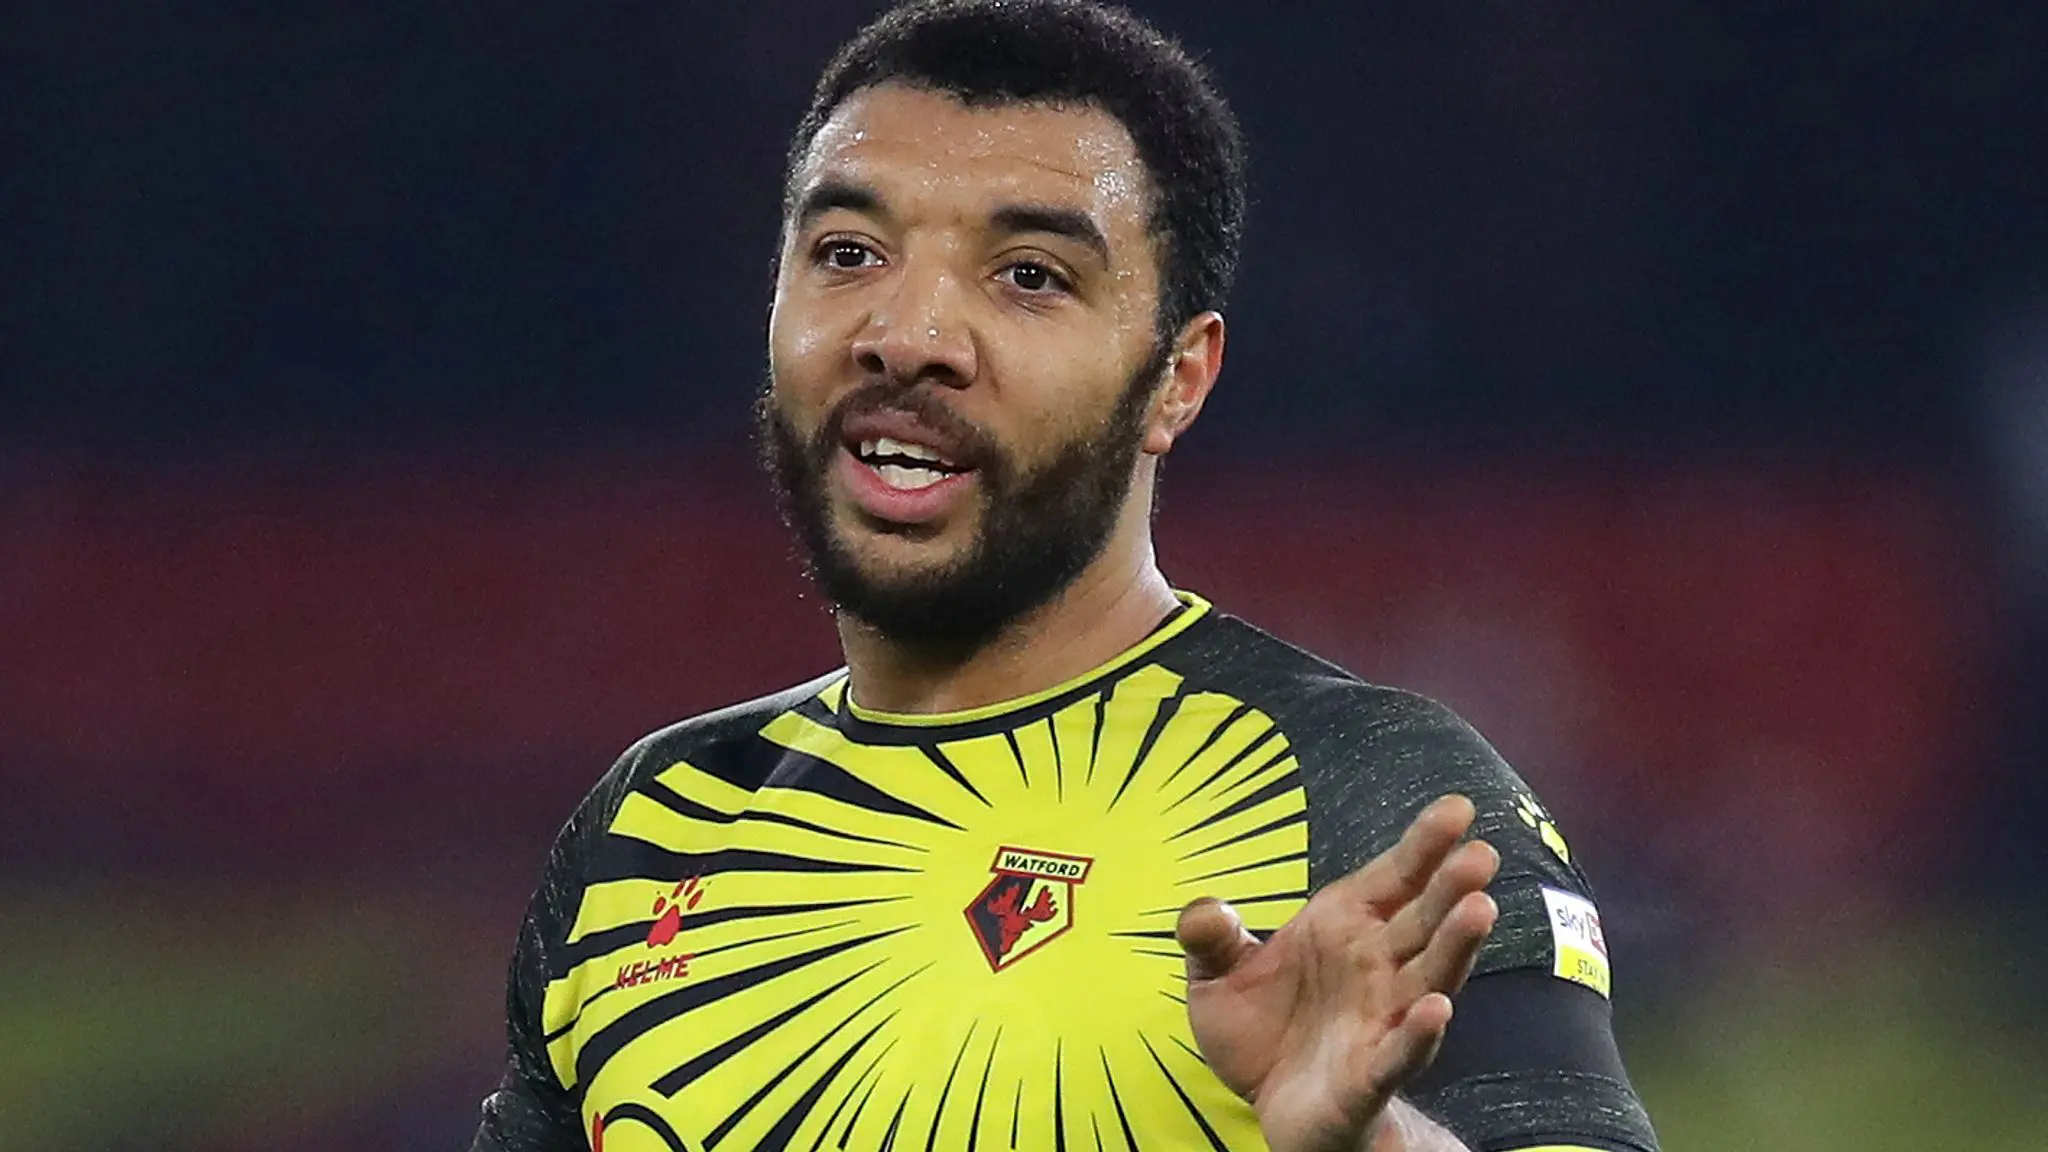 Liverpool: Troy Deeney names coach that’ll succeed Klopp at Anfield